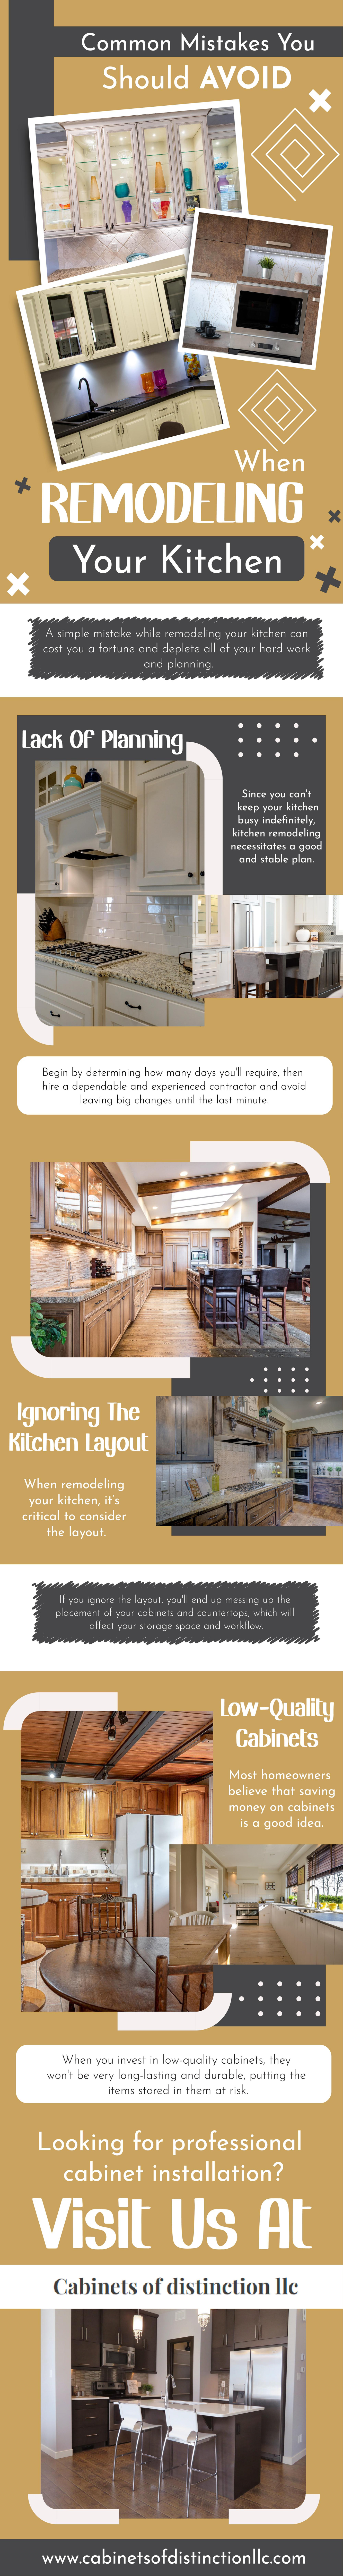 Common Mistakes You Should Avoid When Remodeling Your Kitchen